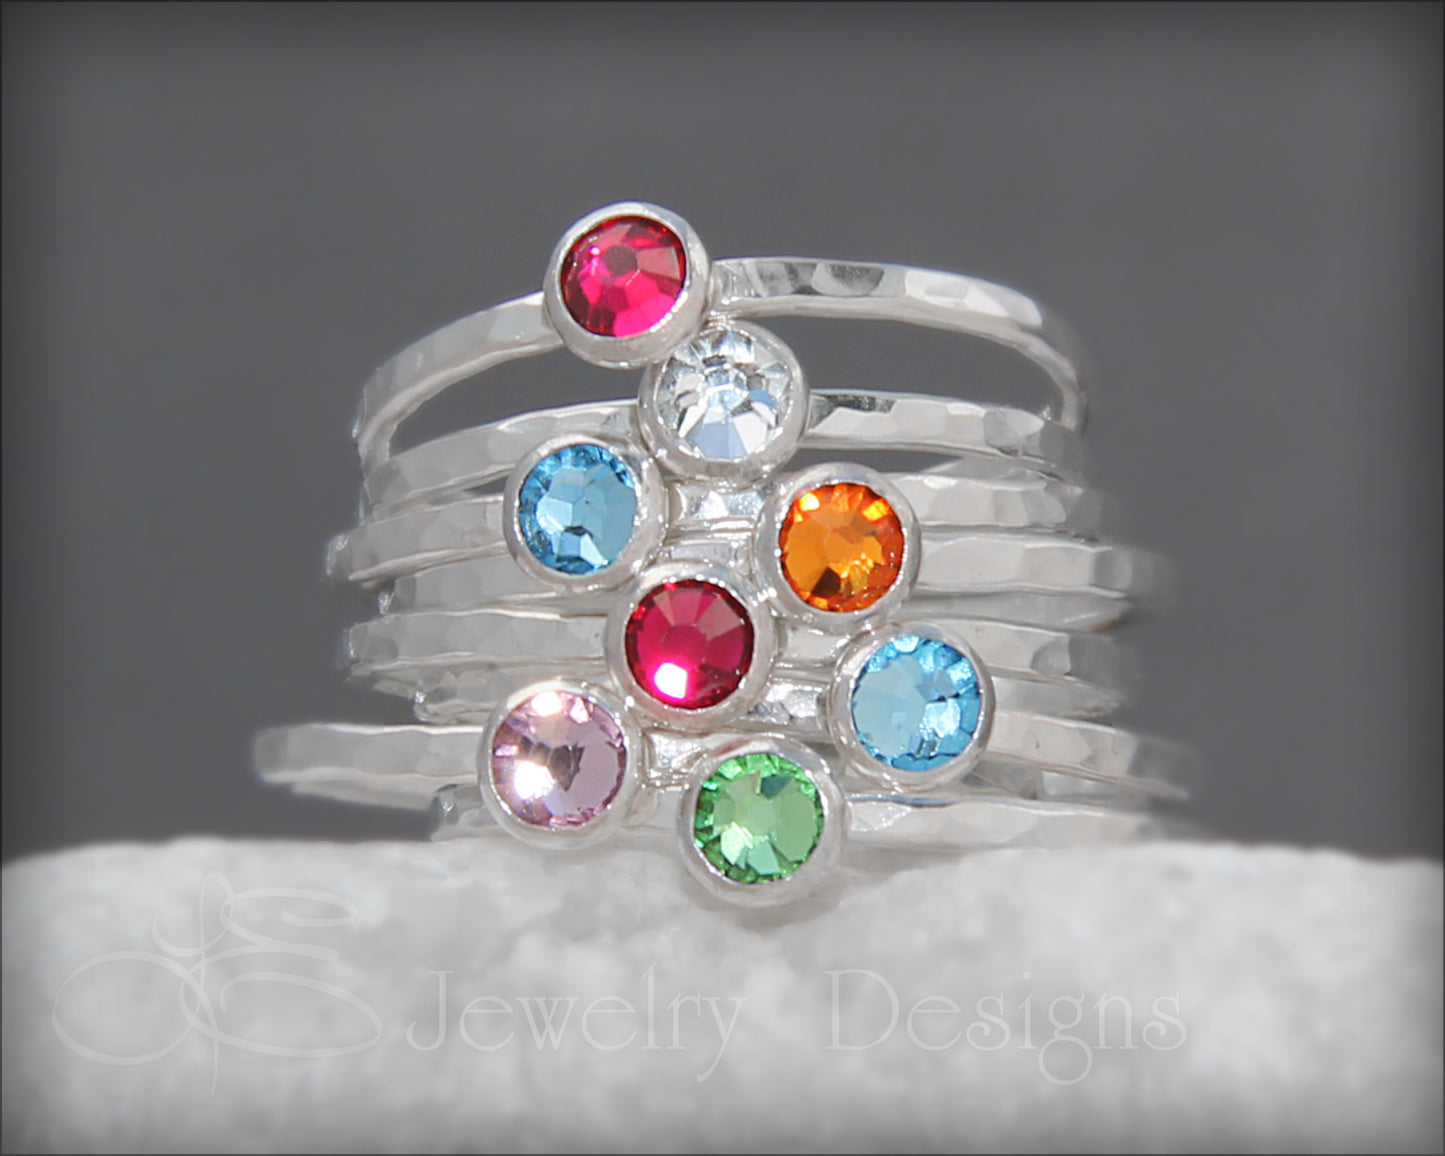 Silver Birthstone Stacking Ring - LE Jewelry Designs